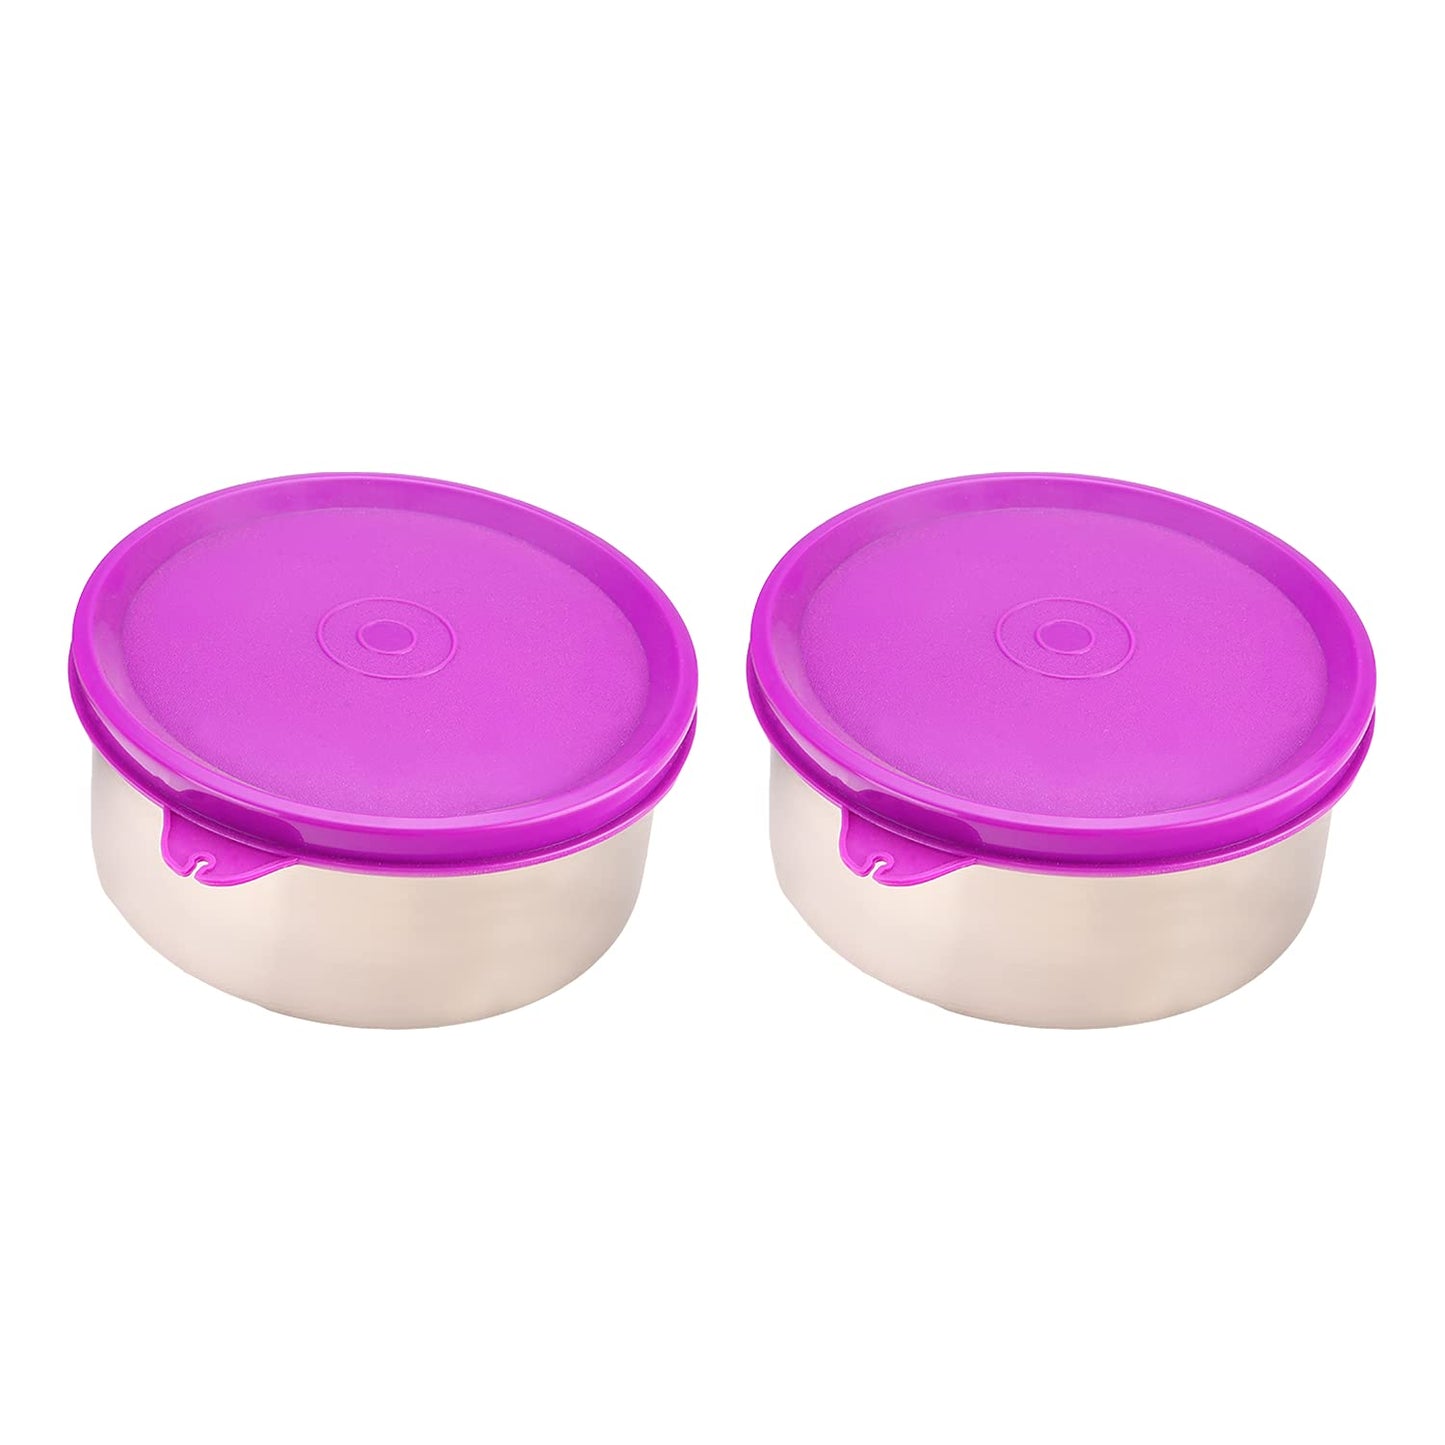 Magic Stainless Steel Containers - Set of 2 (450 ML)